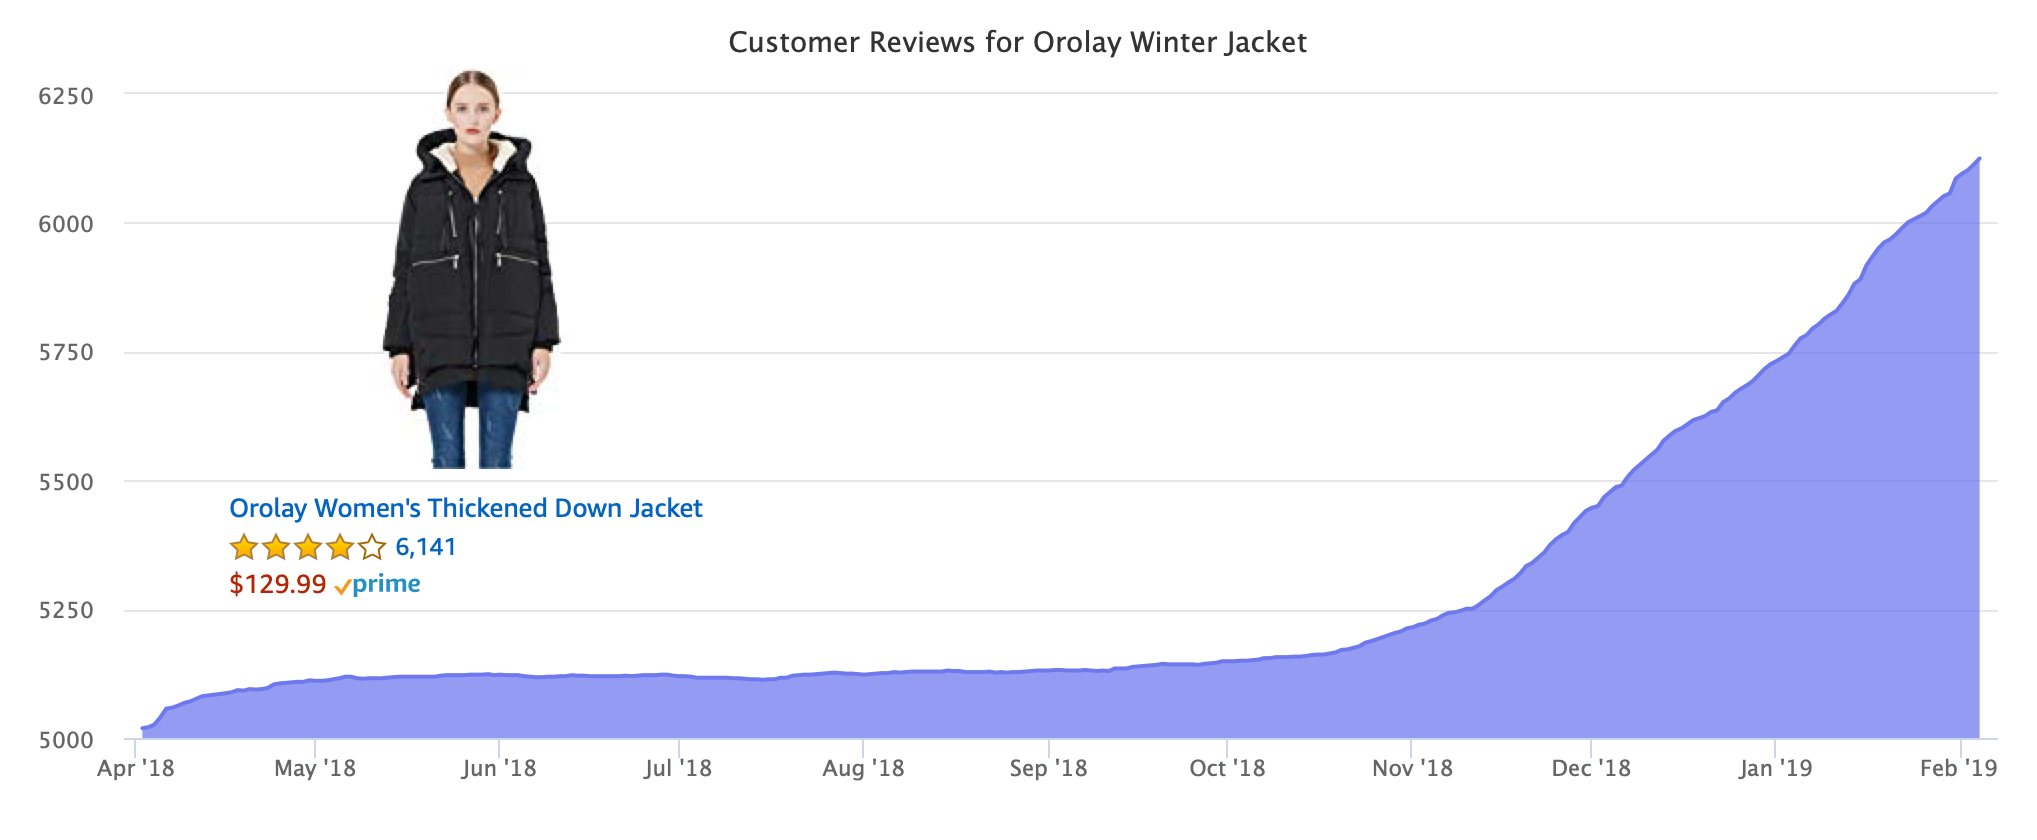 Customer Reviews for Orolay Winter Jacket